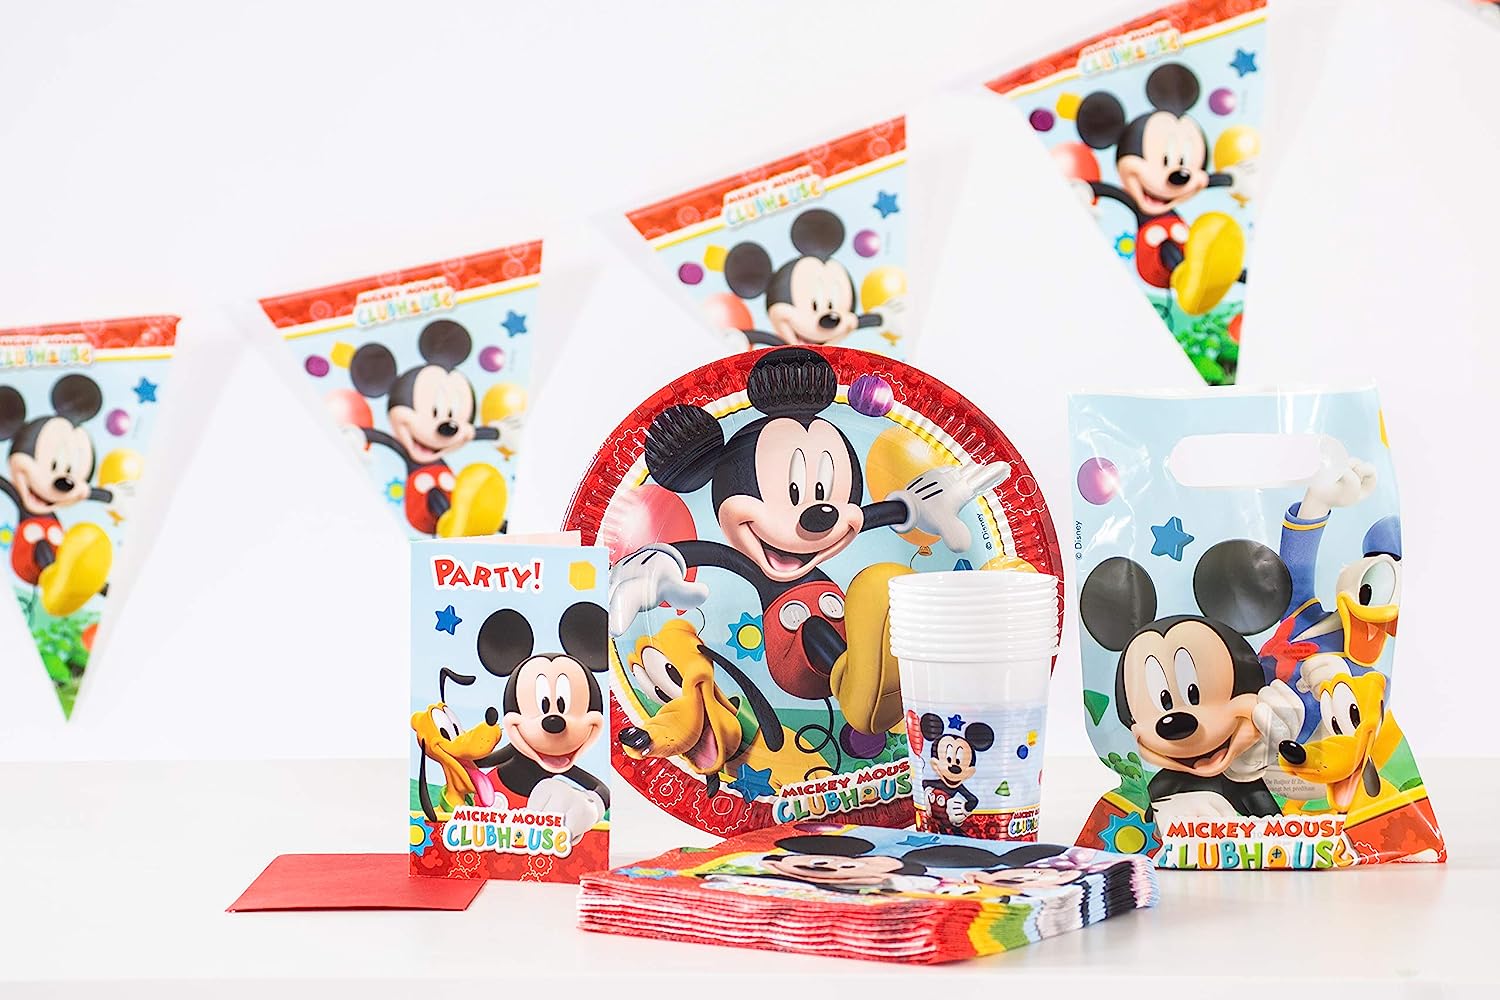 Mickey Mouse Party Birthday Party Ideas | Photo 4 of 6 | Catch My Party